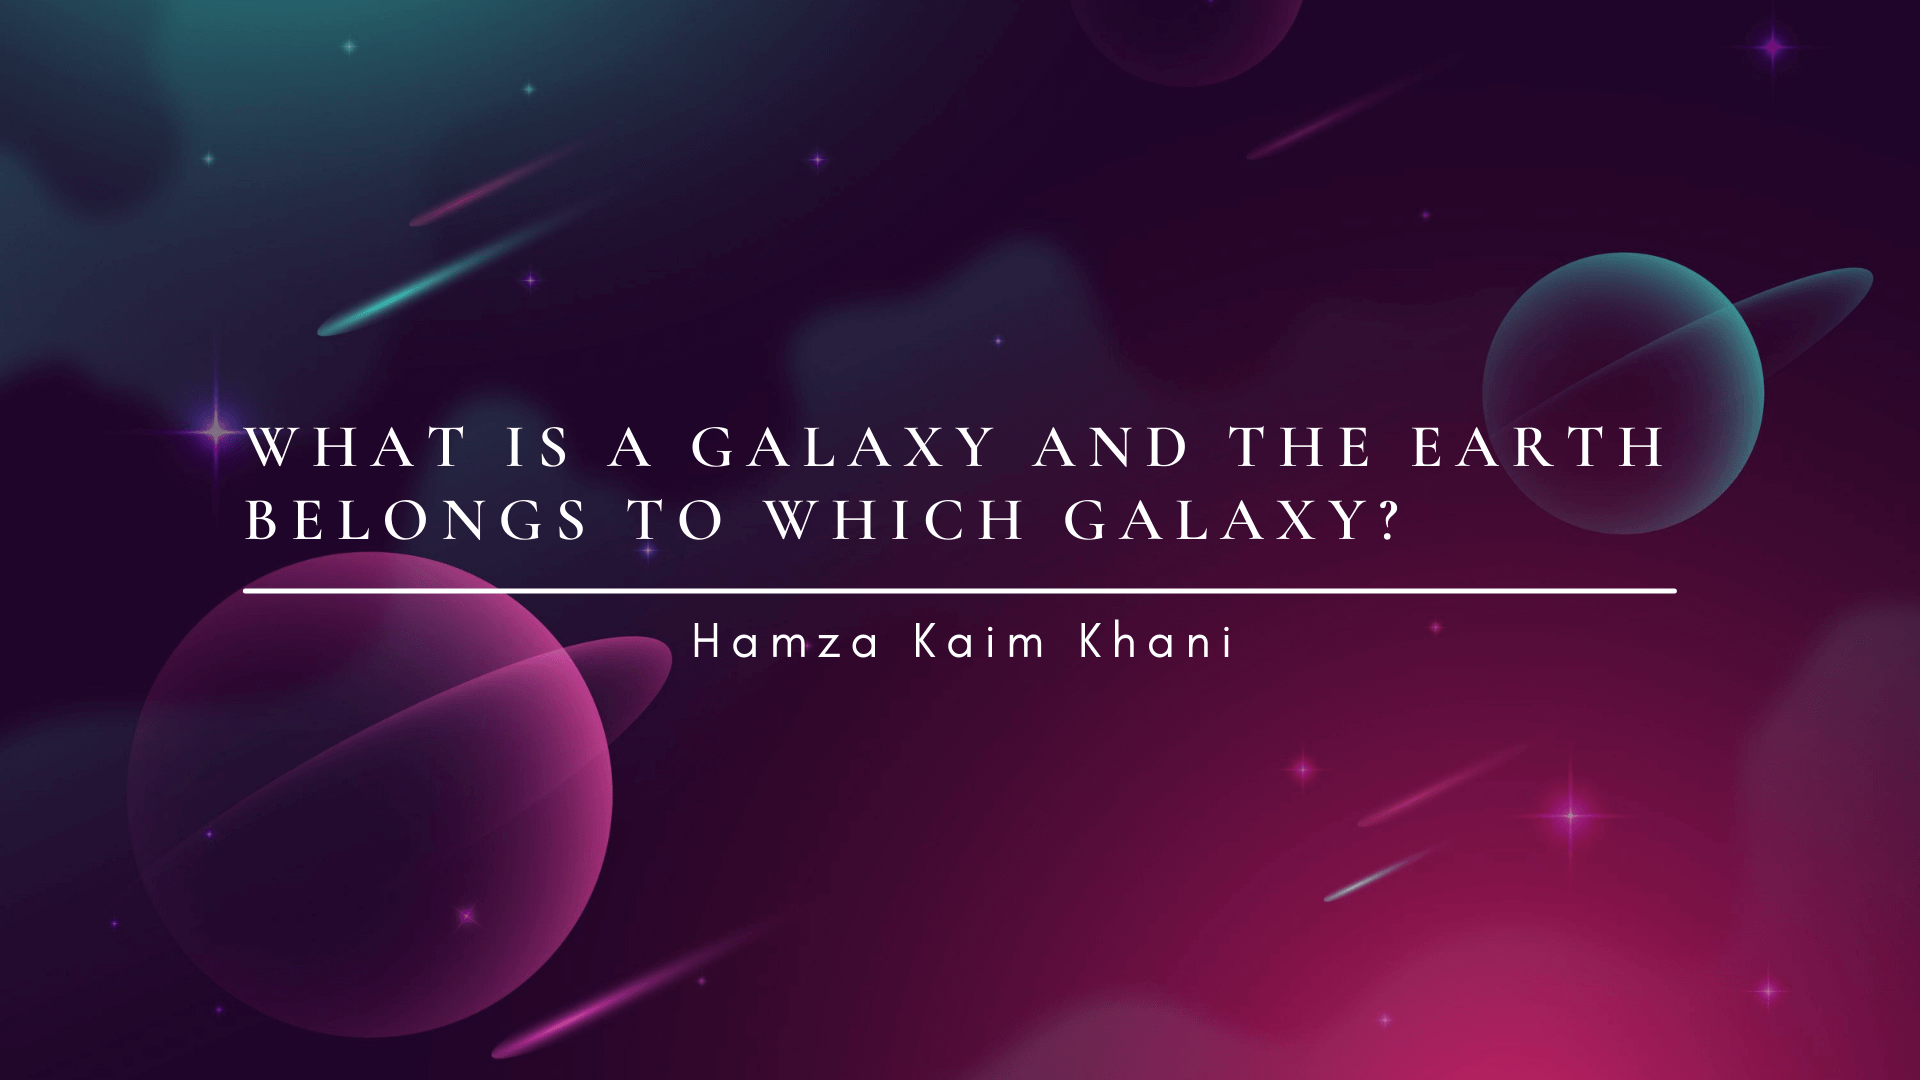 What is a galaxy and the earth belongs to which galaxy